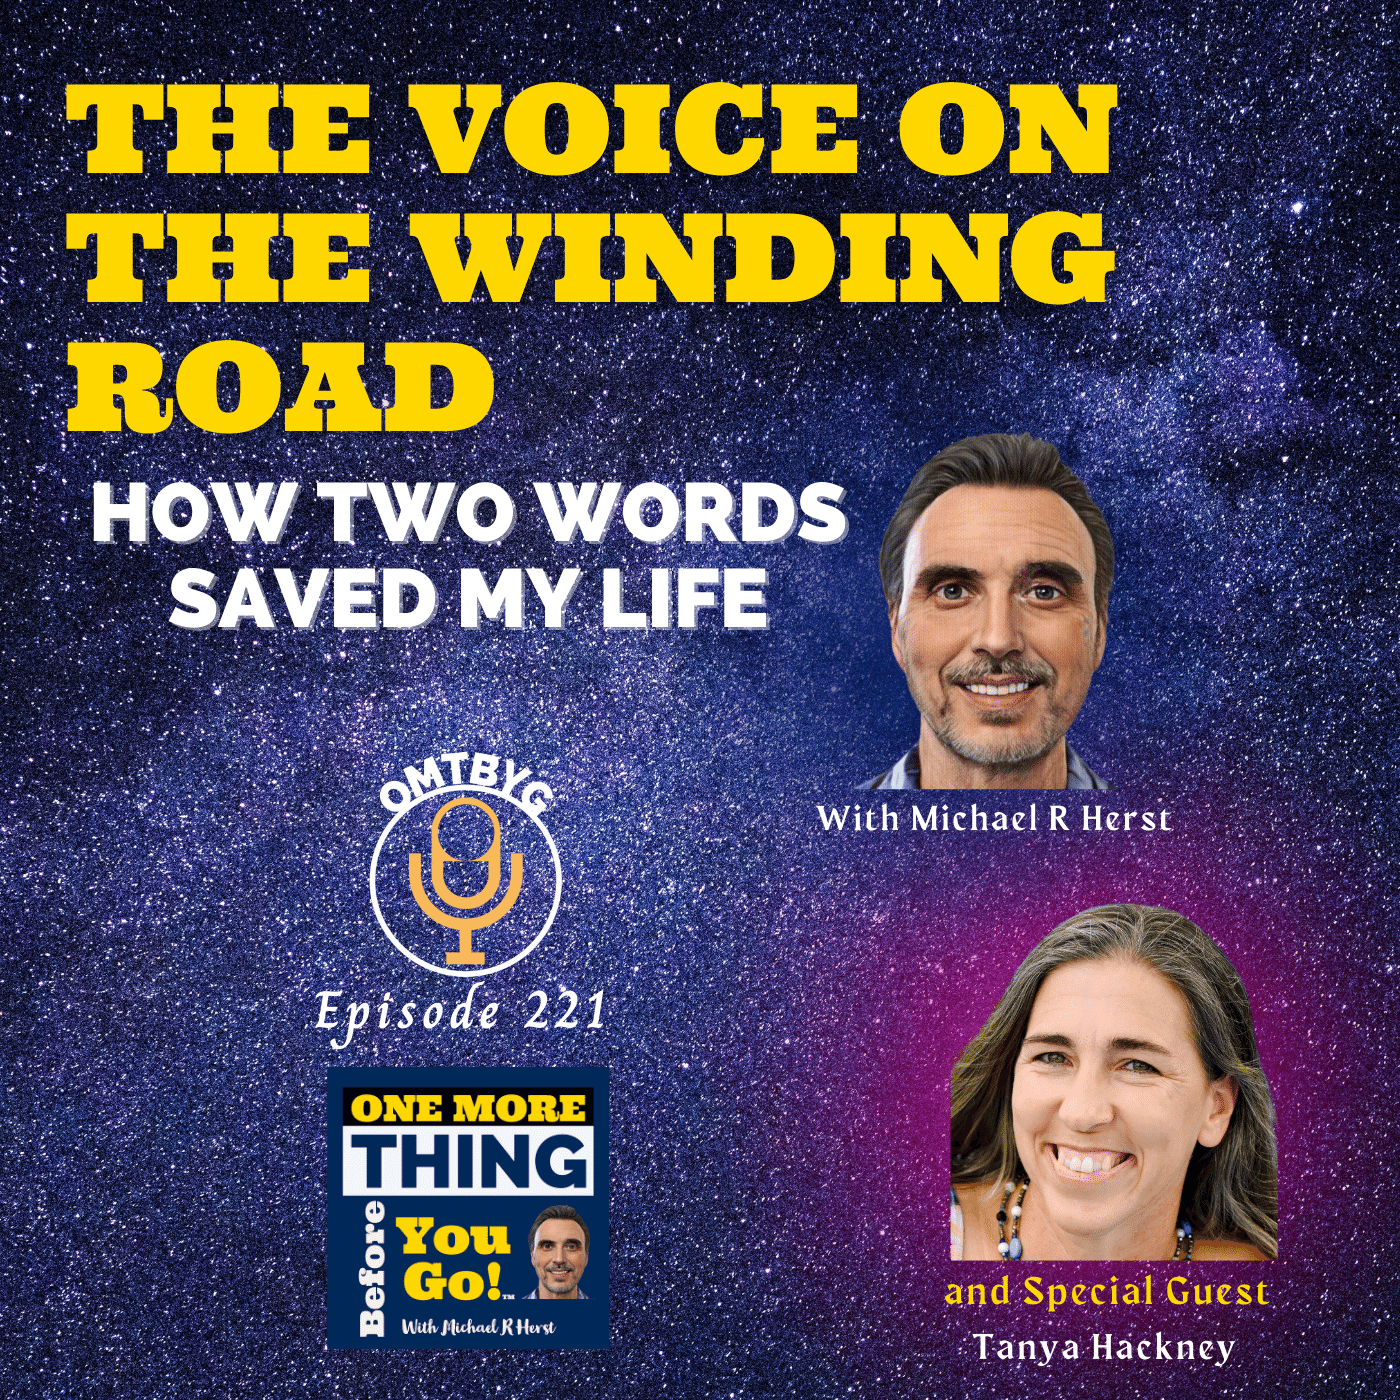 The Voice on the Winding Road- How Two Words Saved my Life